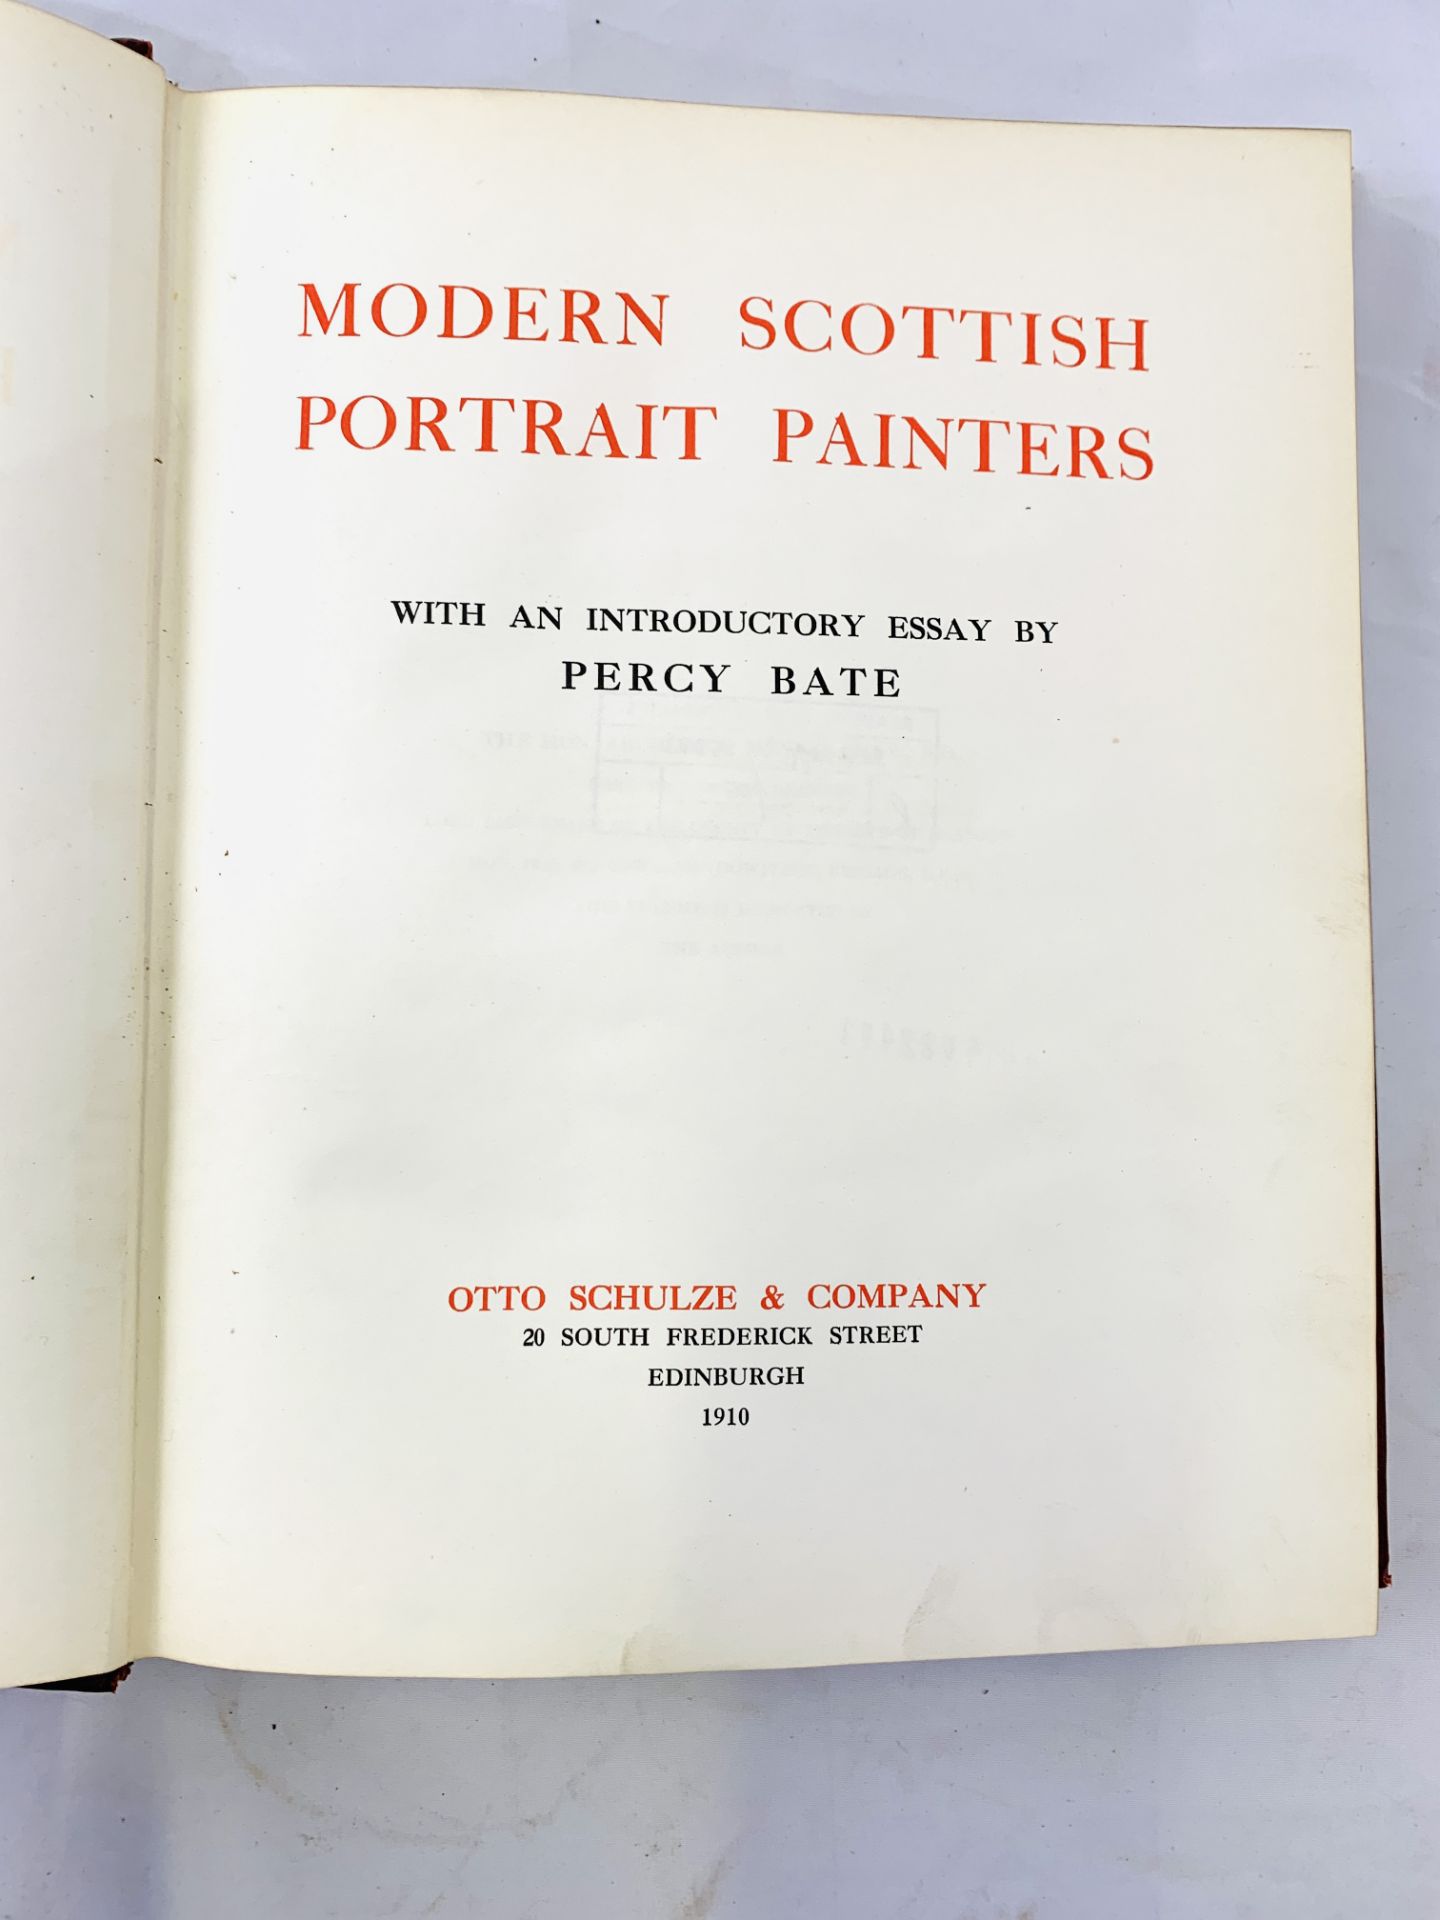 Modern Scottish Portrait Painters, limited edition number 80/375, - Image 2 of 5